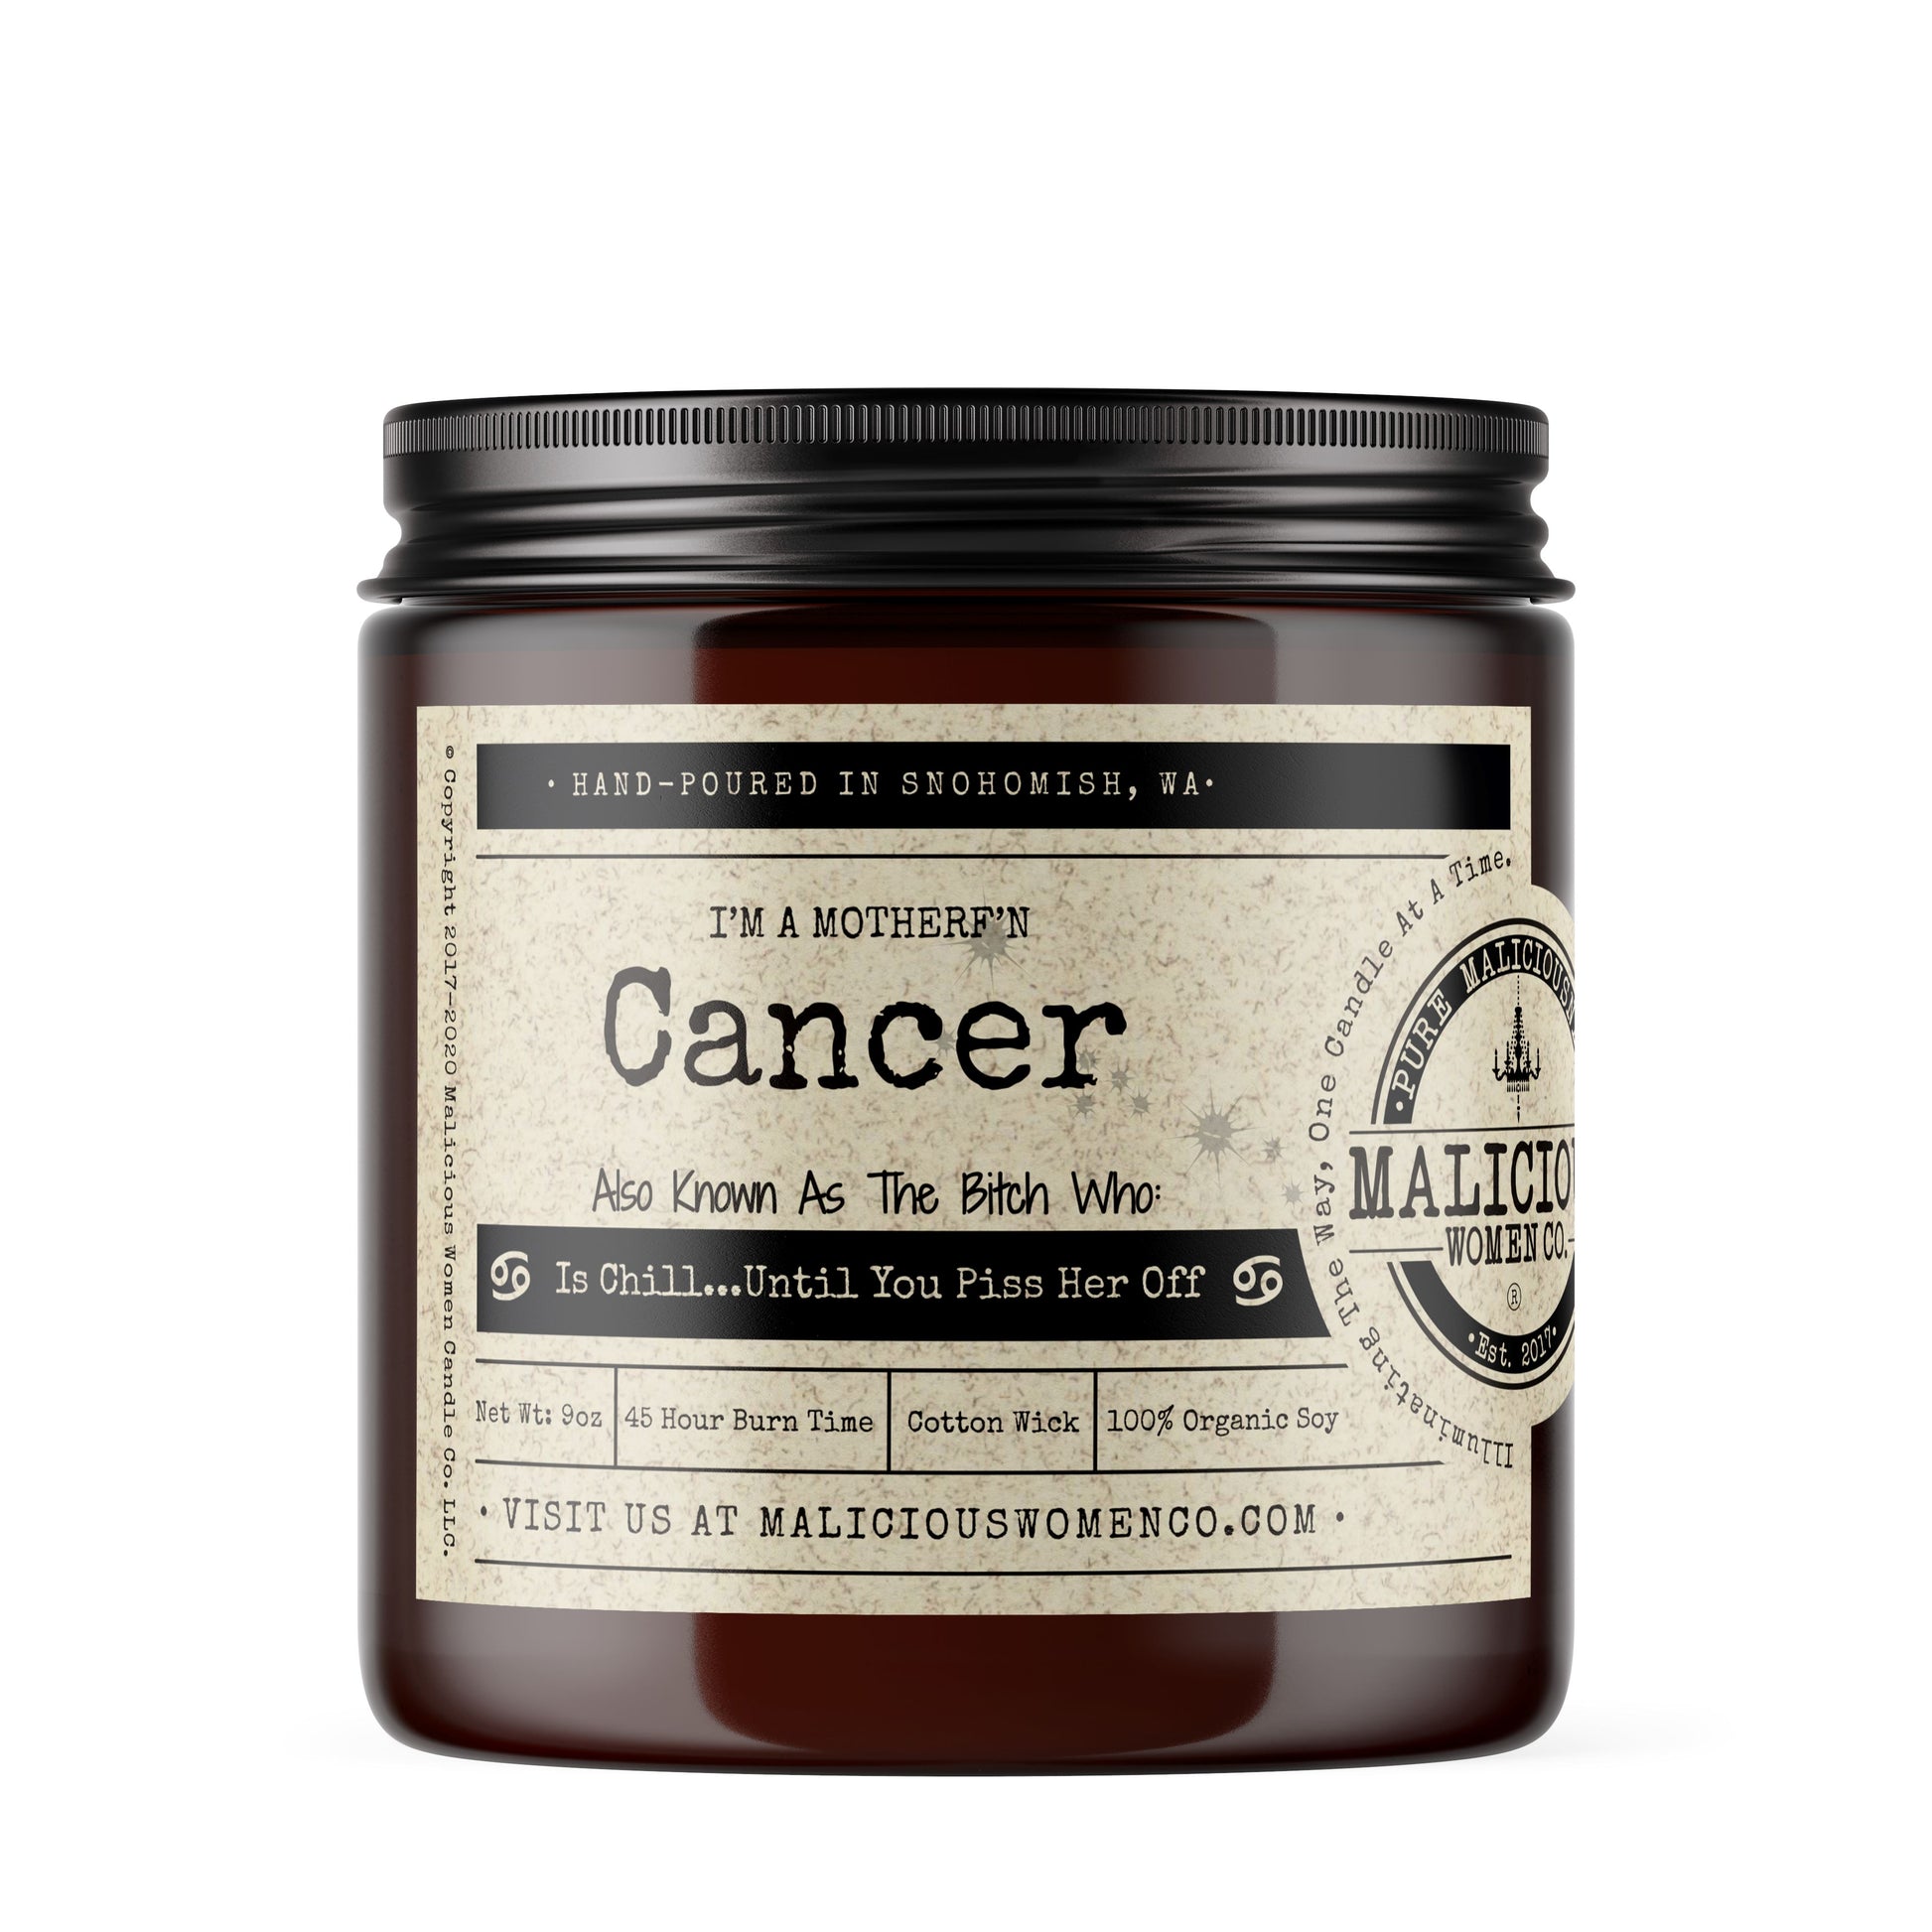 I'm a MotherF'n Cancer (Jun 21-Jul 22) The Zodiac Bitch- Scent: Chill Vibes ZodiacCandles Malicious Women Candle Co. 